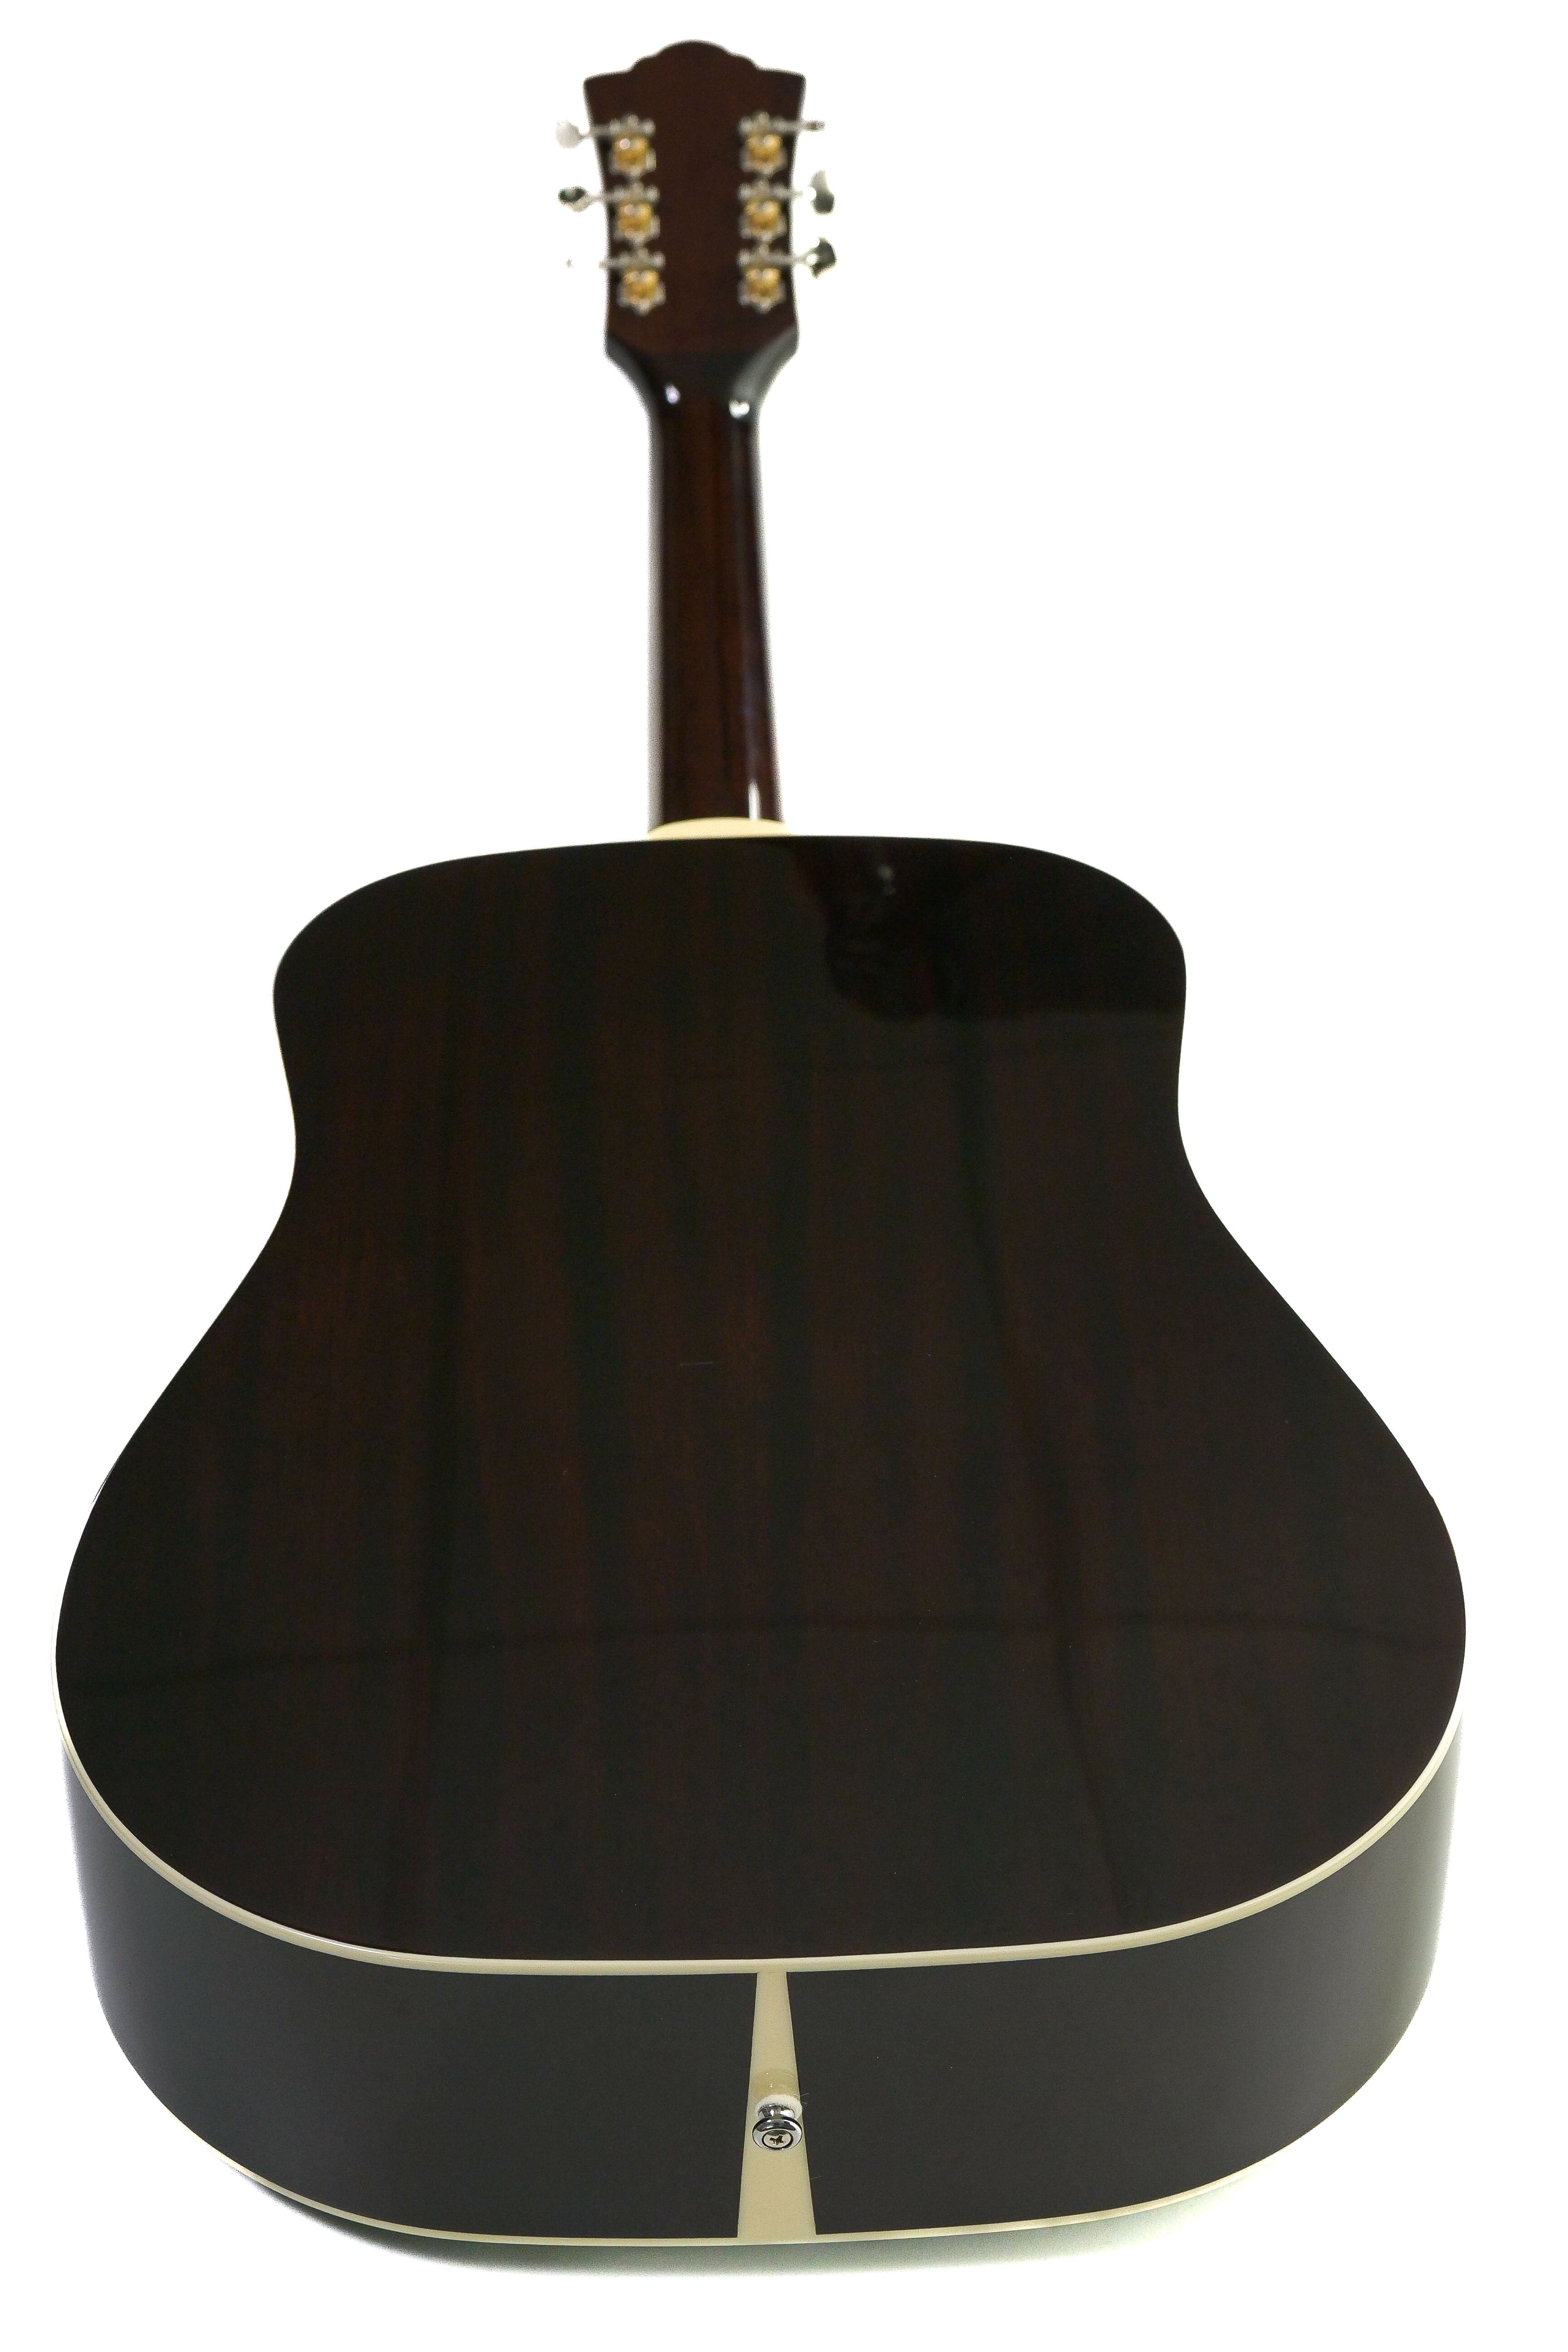 Guild D-140 ATB Acoustic Guitar "Wild Mustang"